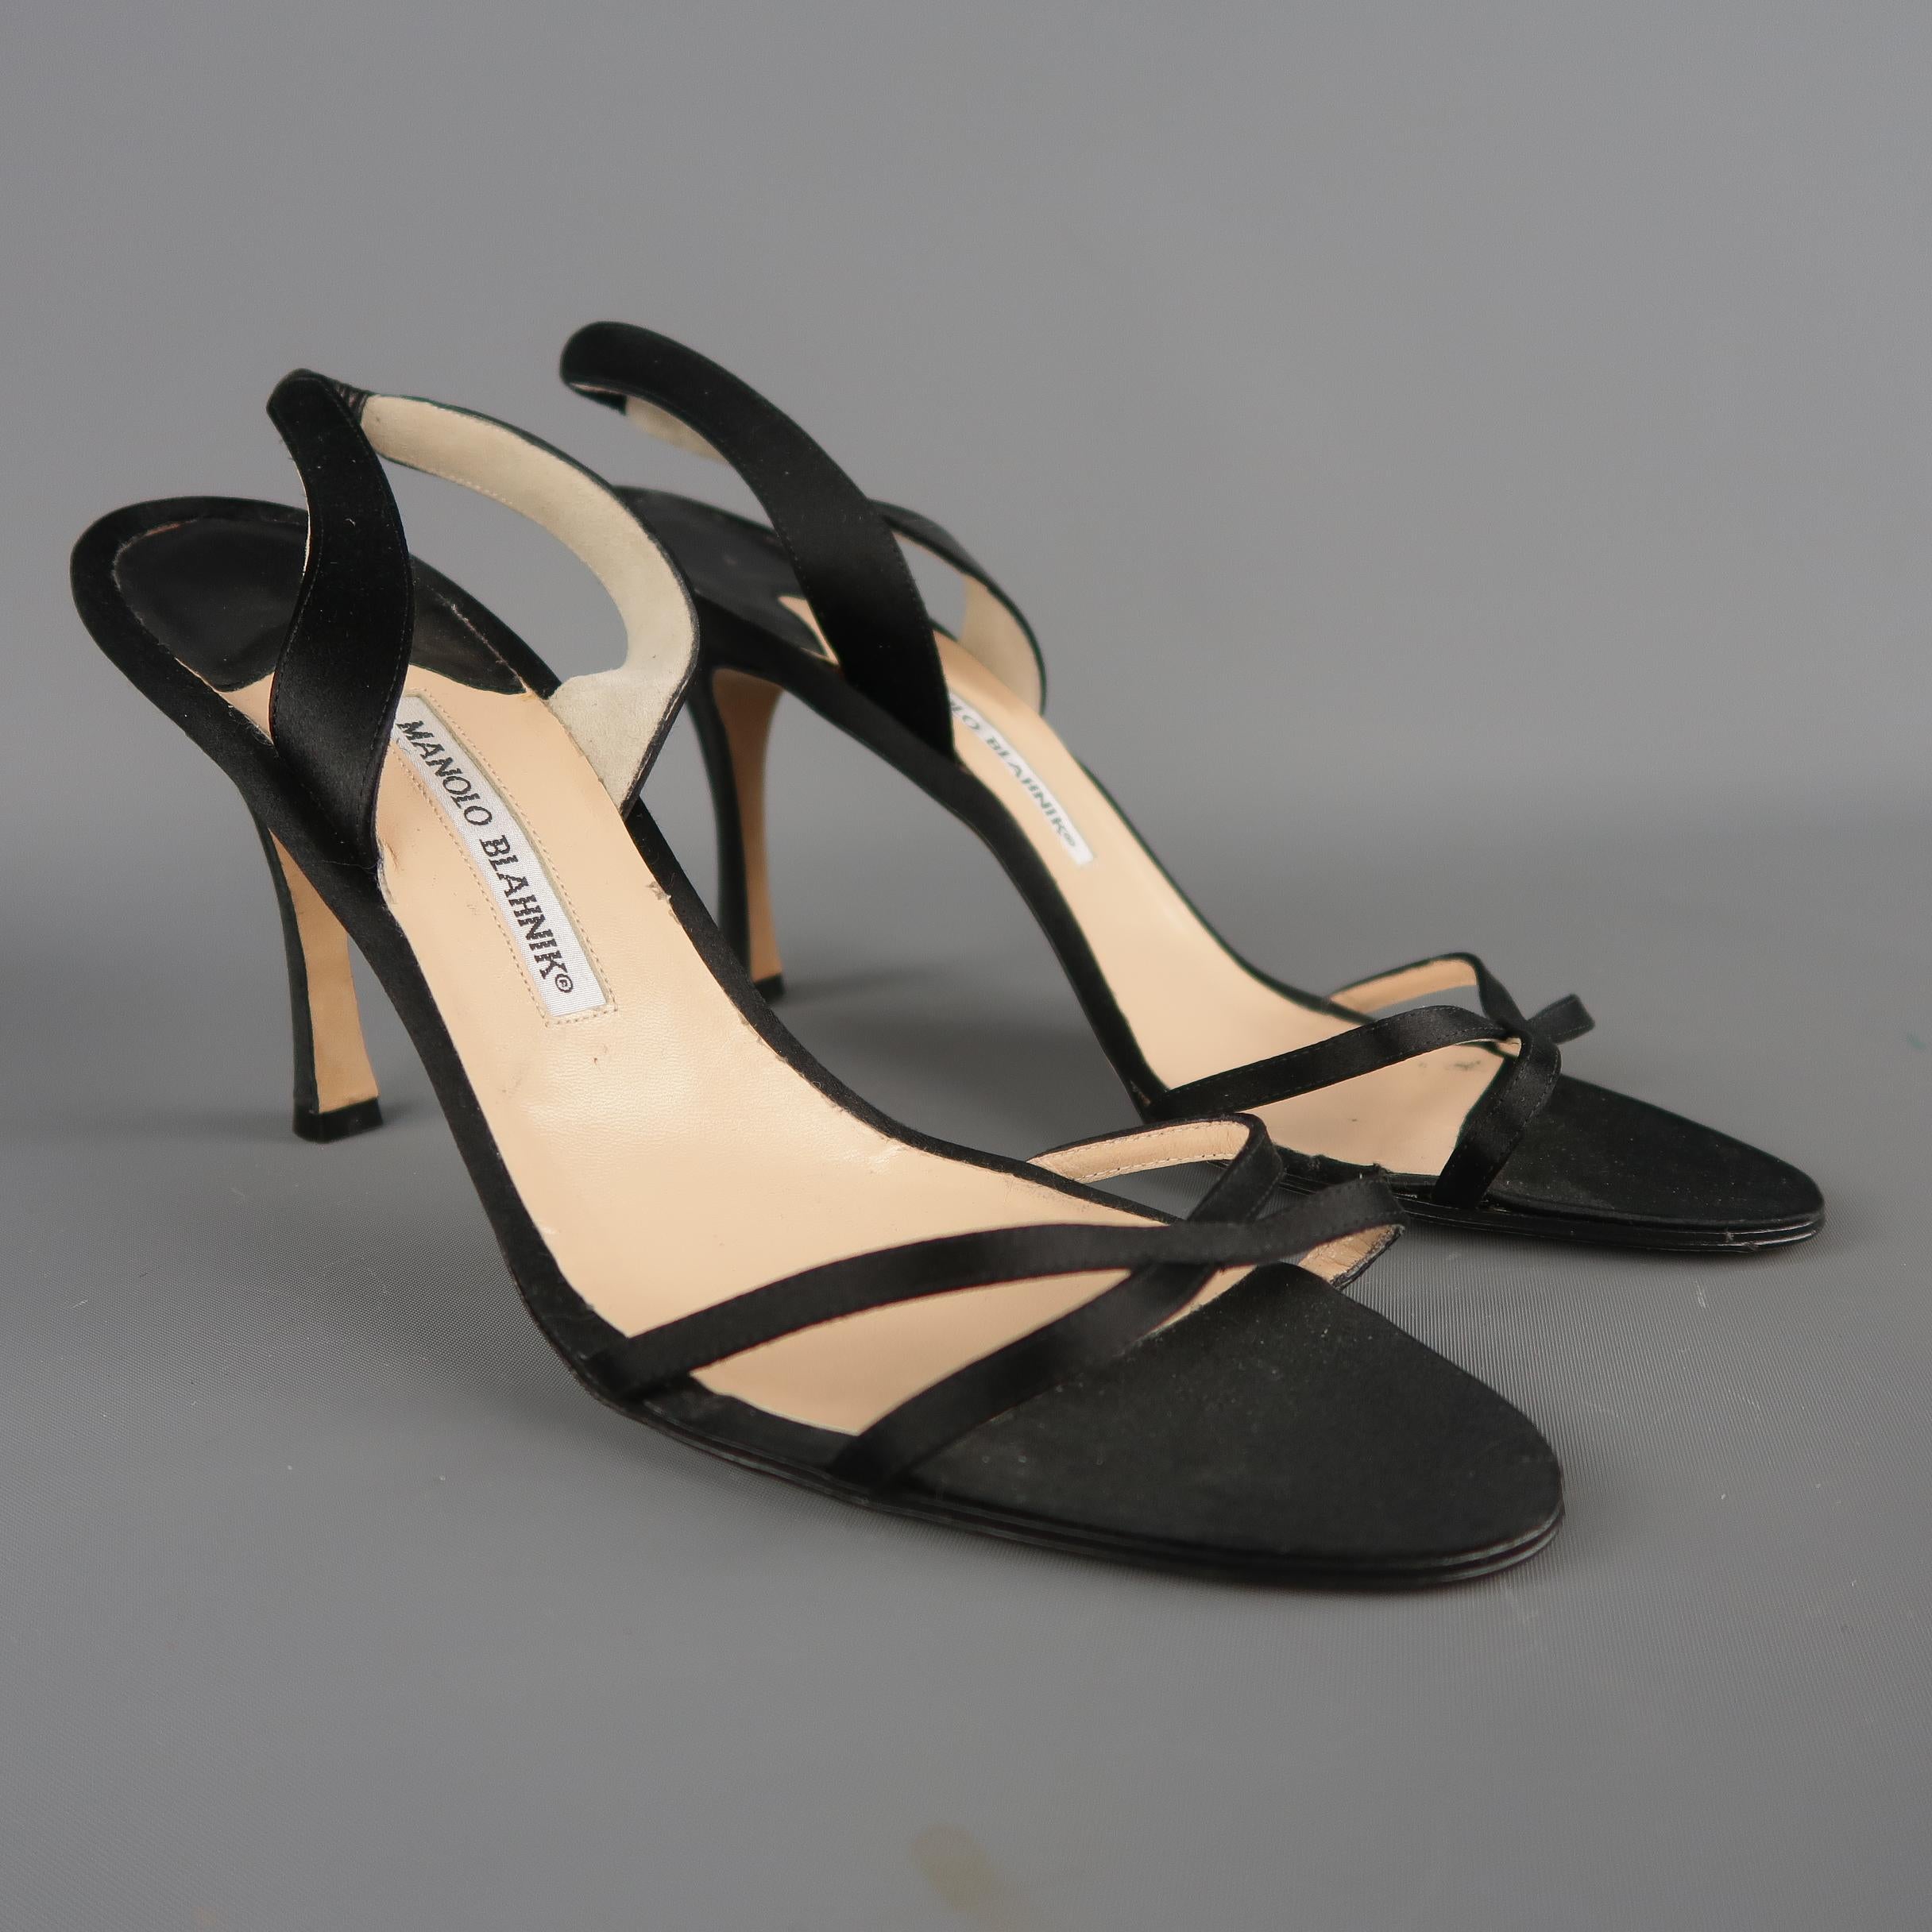 MANOLO BLAHNIK sandals come in black silk satin with a crossed toe strap. covered stiletto heel, and sling back. Never worn. Made in Italy.
 
New without Tags.
Marked: IT 42
 
Measurements:
 
Heel: 4 in.